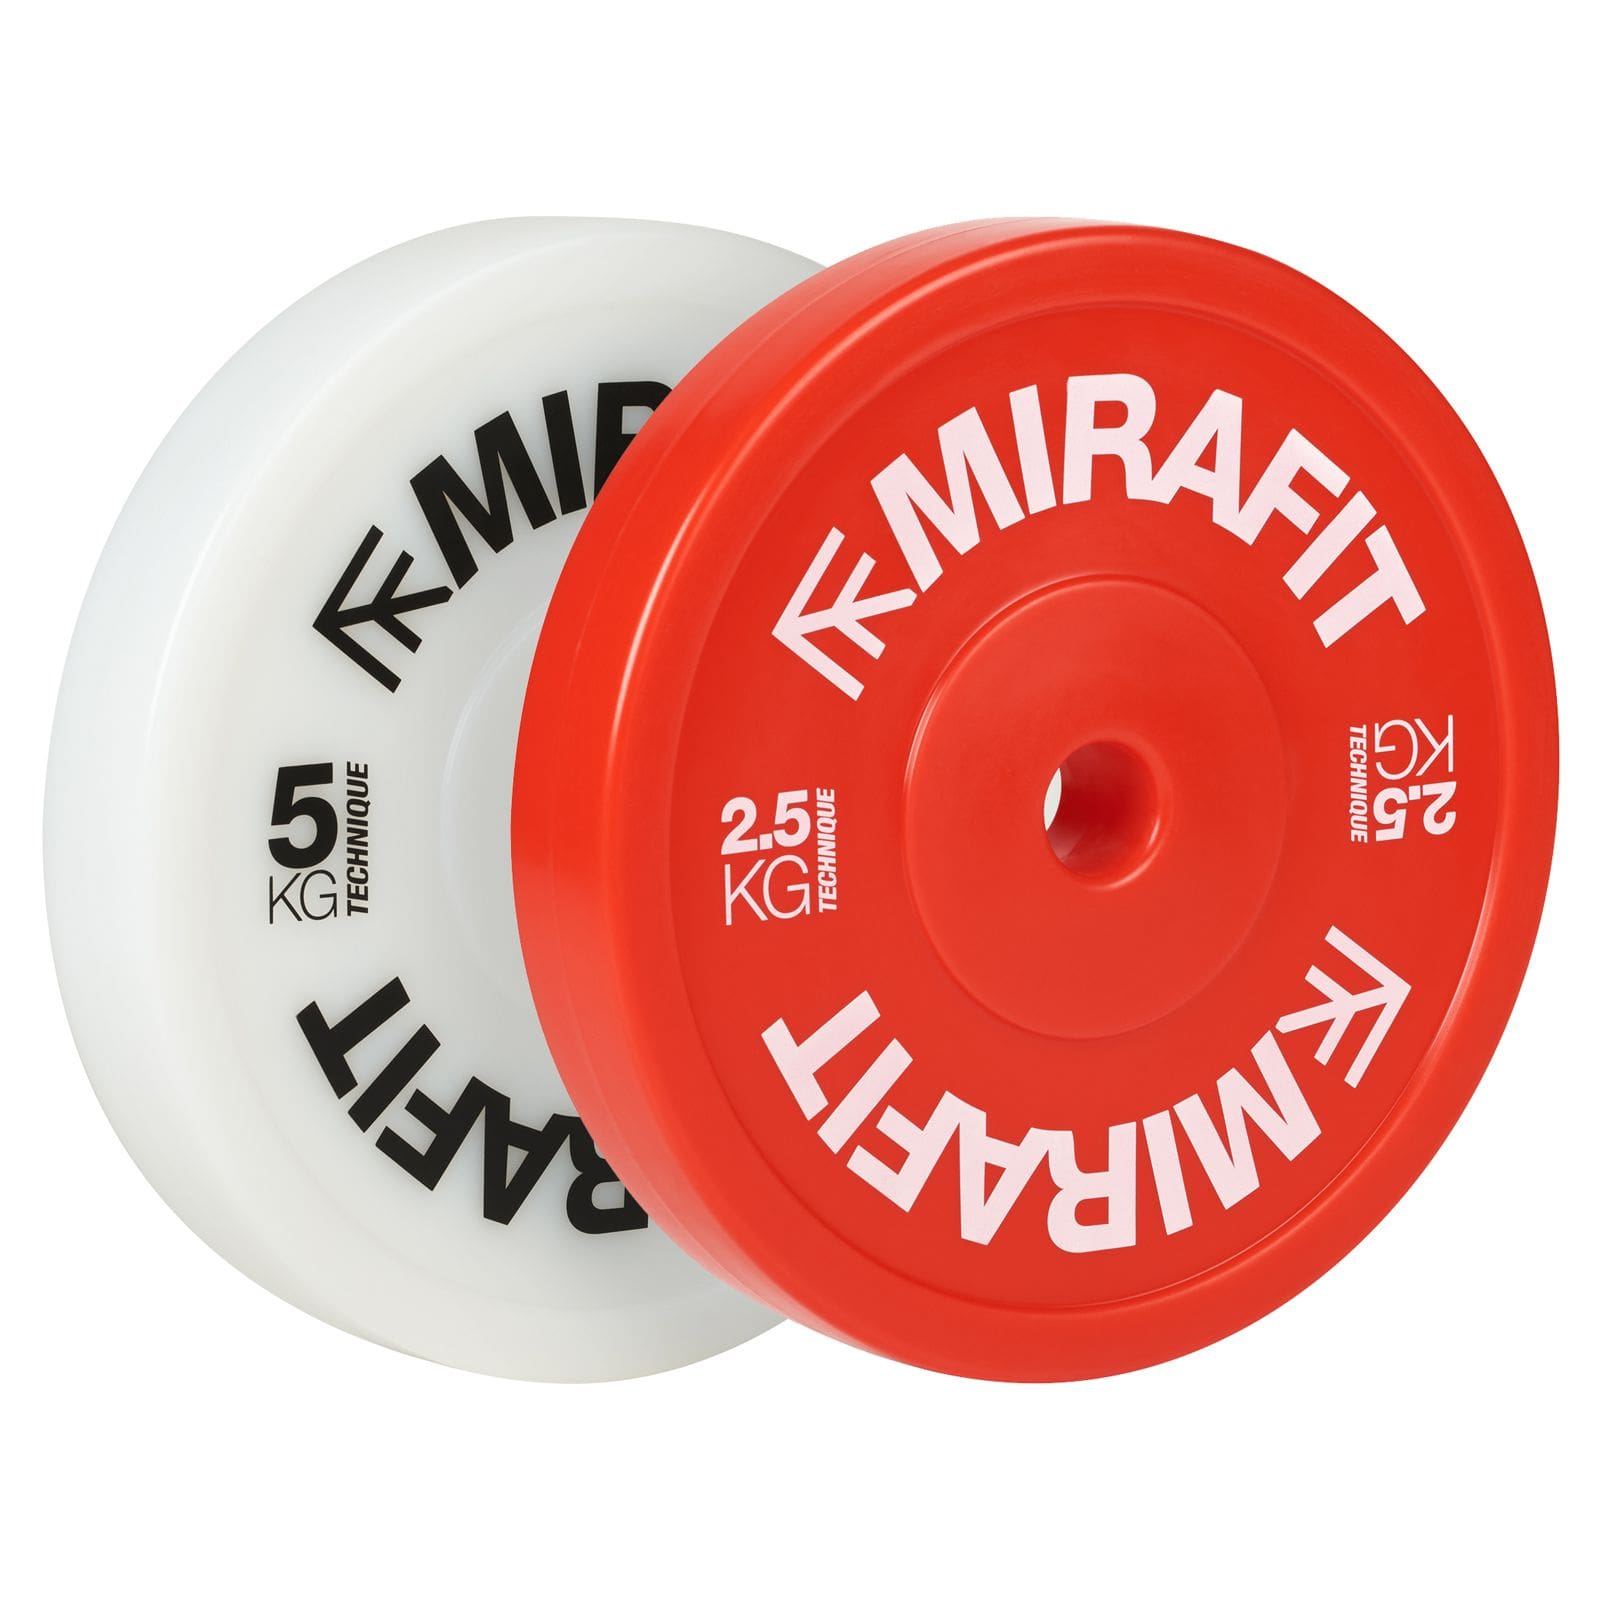 Mirafit Olympic Technique Bumper Plate Review